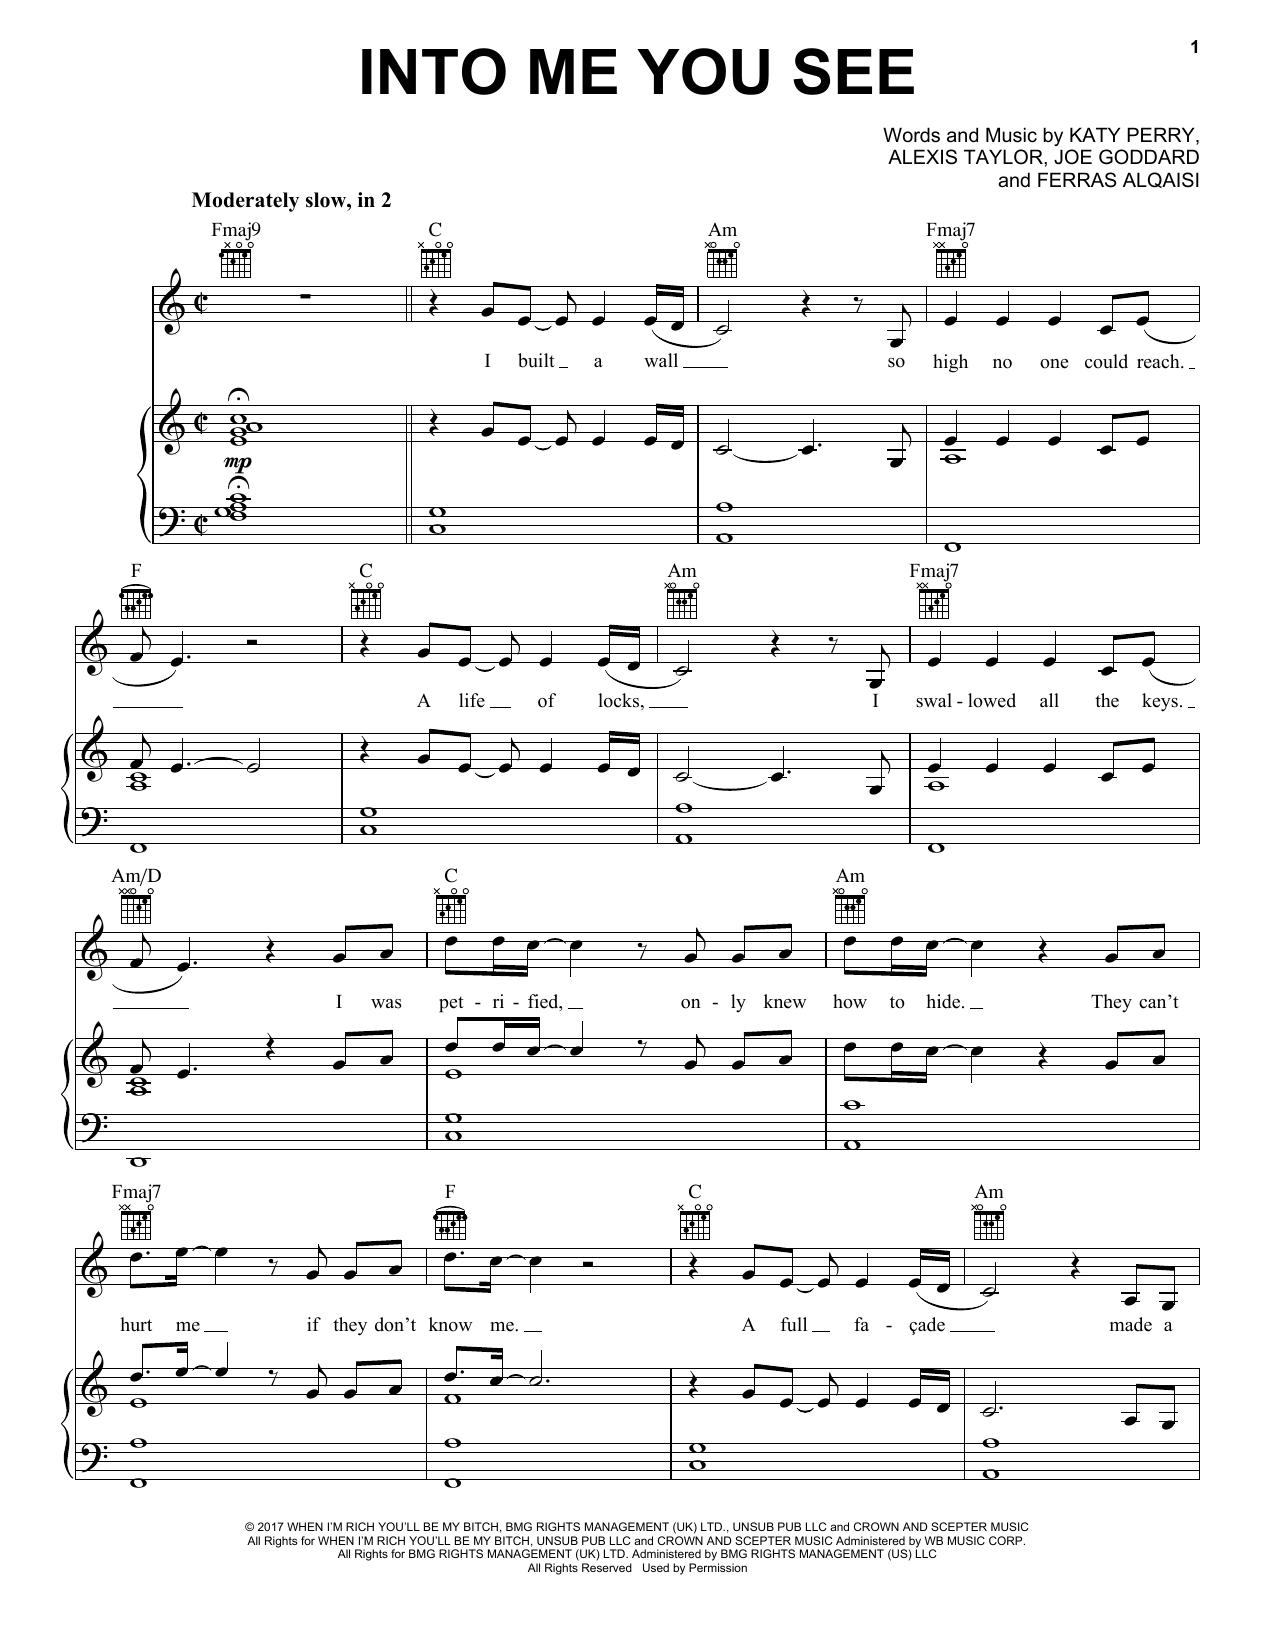 Download Katy Perry Into Me You See Sheet Music